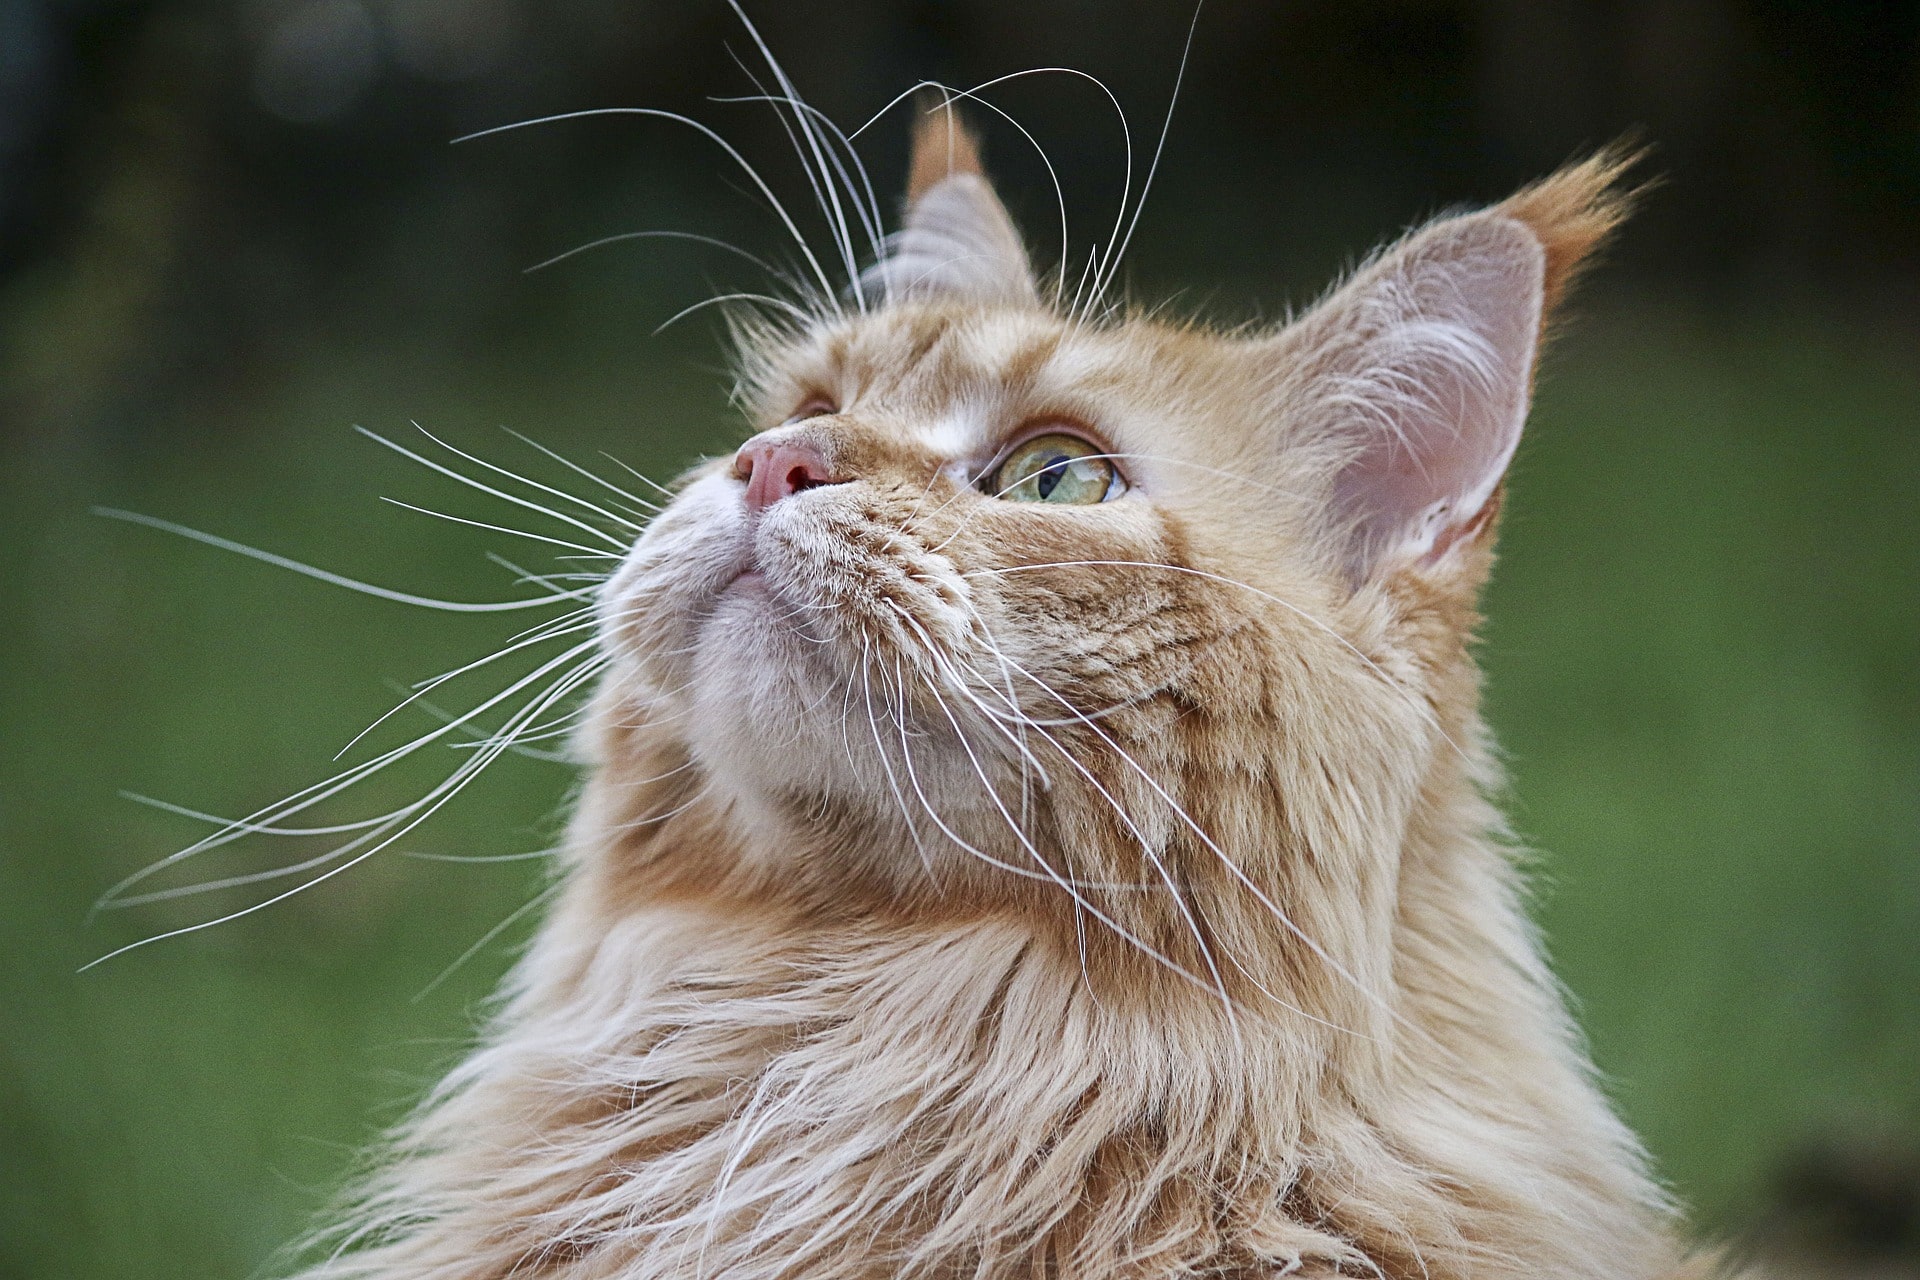 Cat with long whiskers staring upwards.